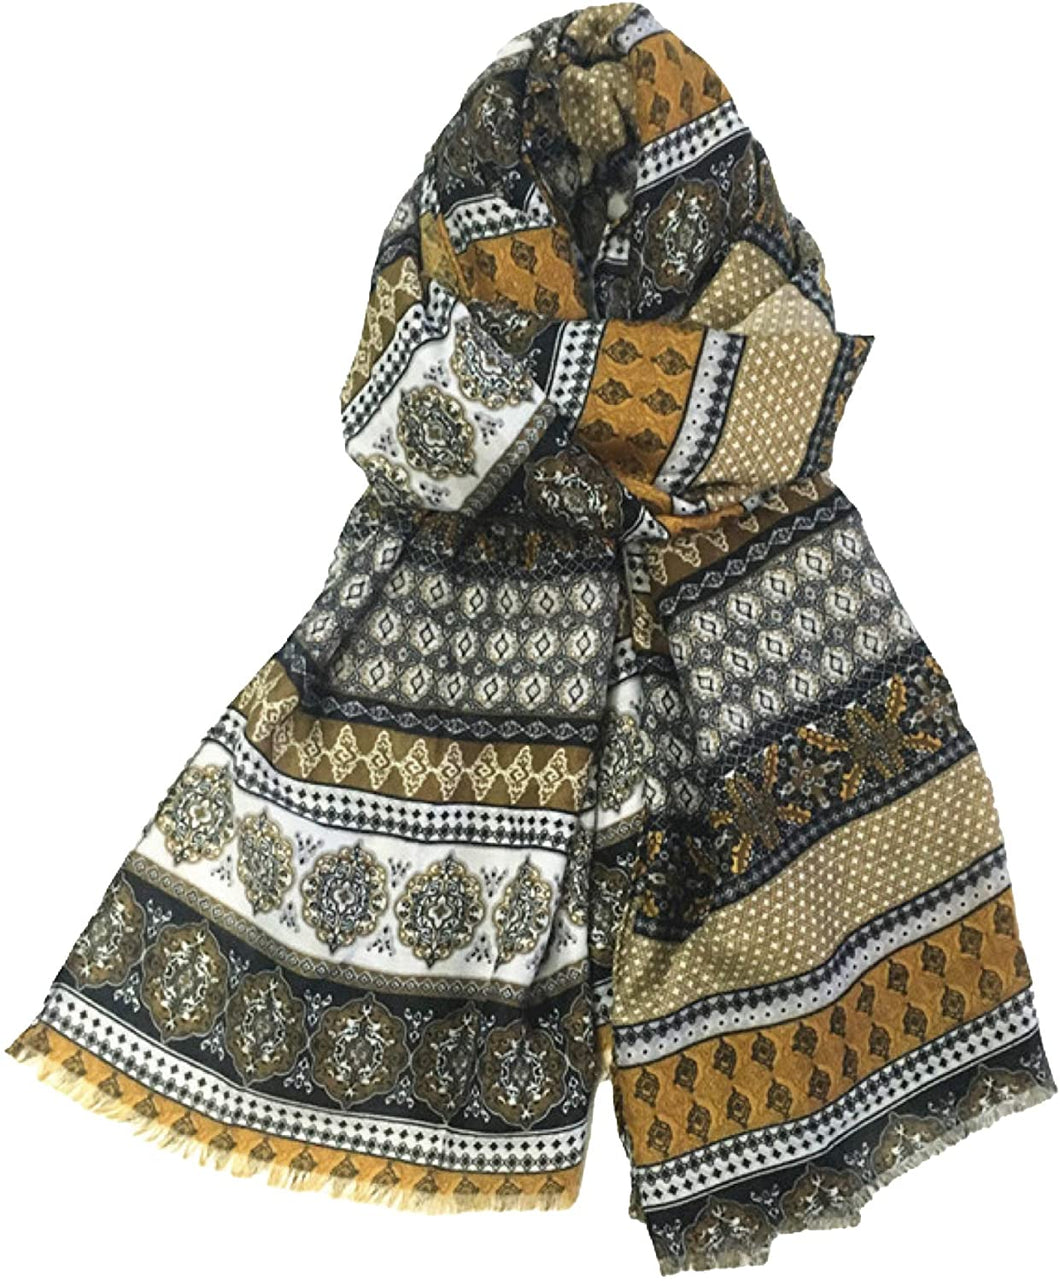 Vintage Bohemian Inspired Boho Style Long Fashion Scarf Scarves Wrap Shawl for Women Ladies by World of Shawls - World of Scarfs